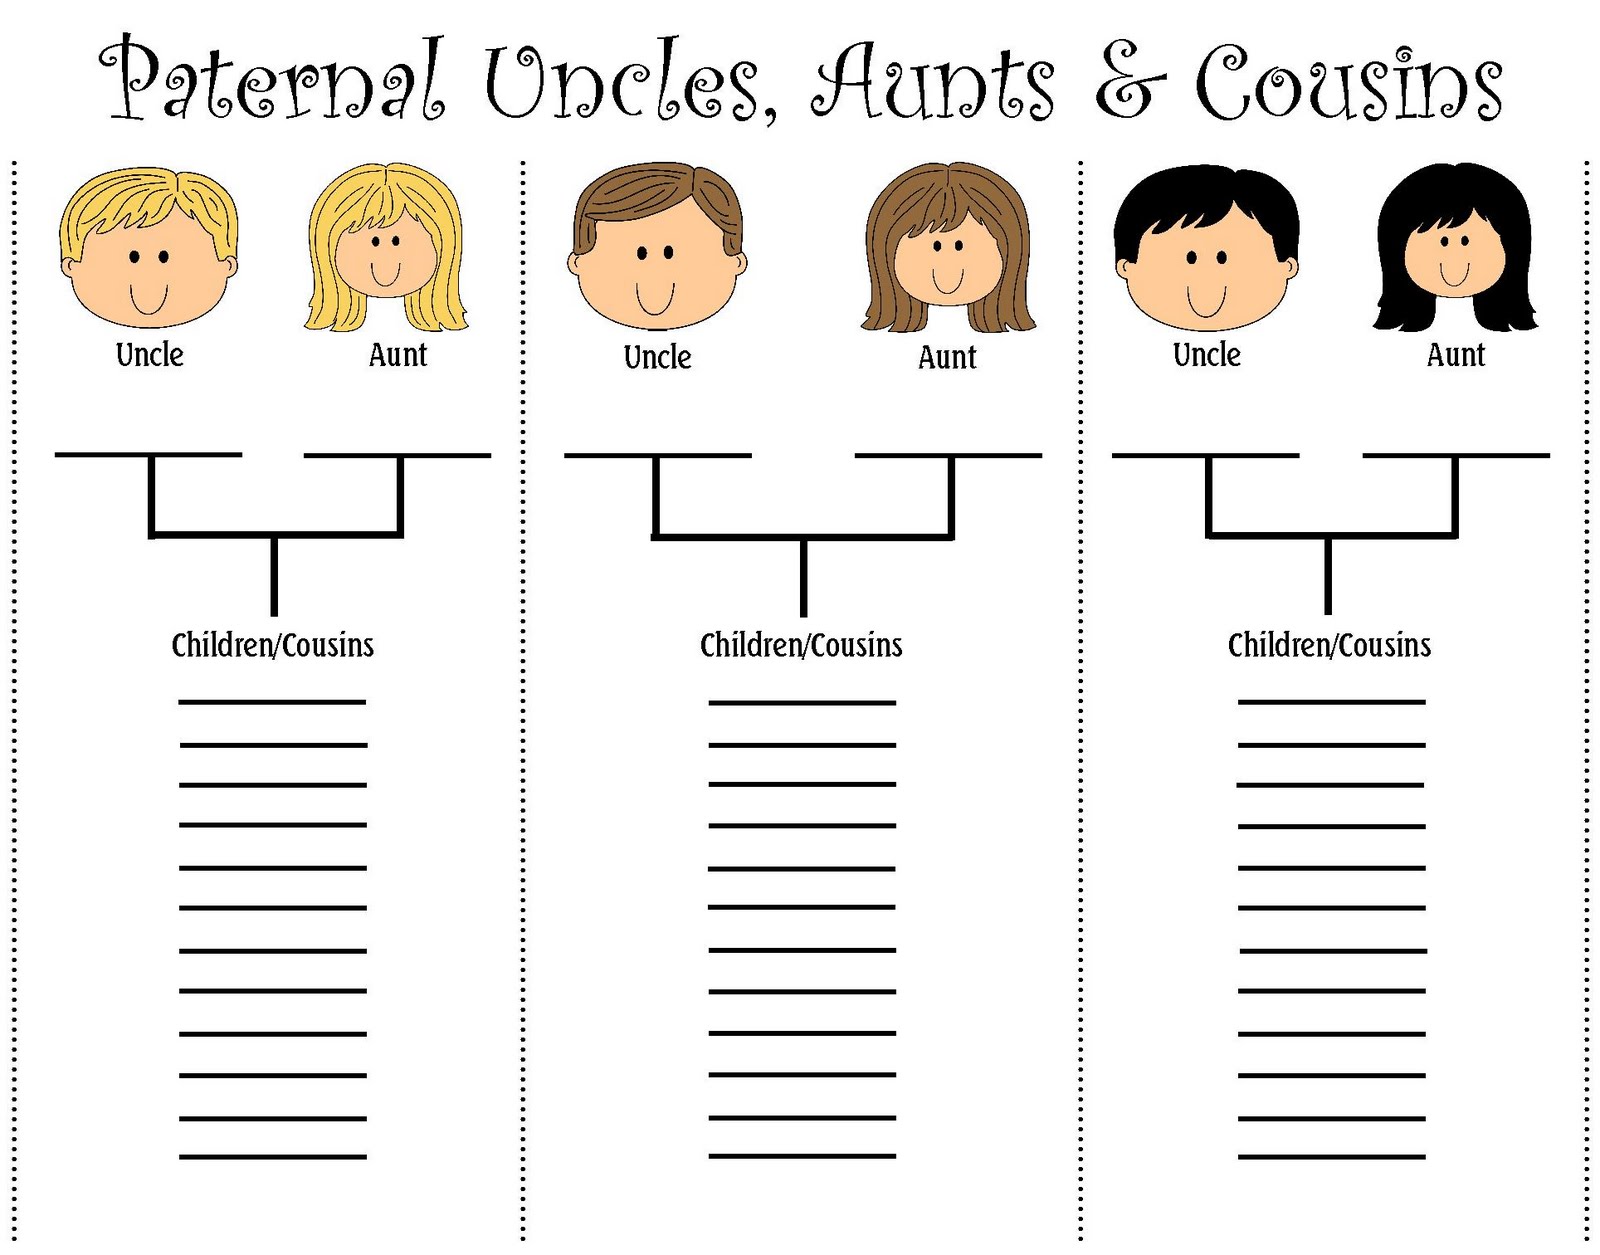 printable-family-tree-template-with-siblings-aunts-uncles-cousins